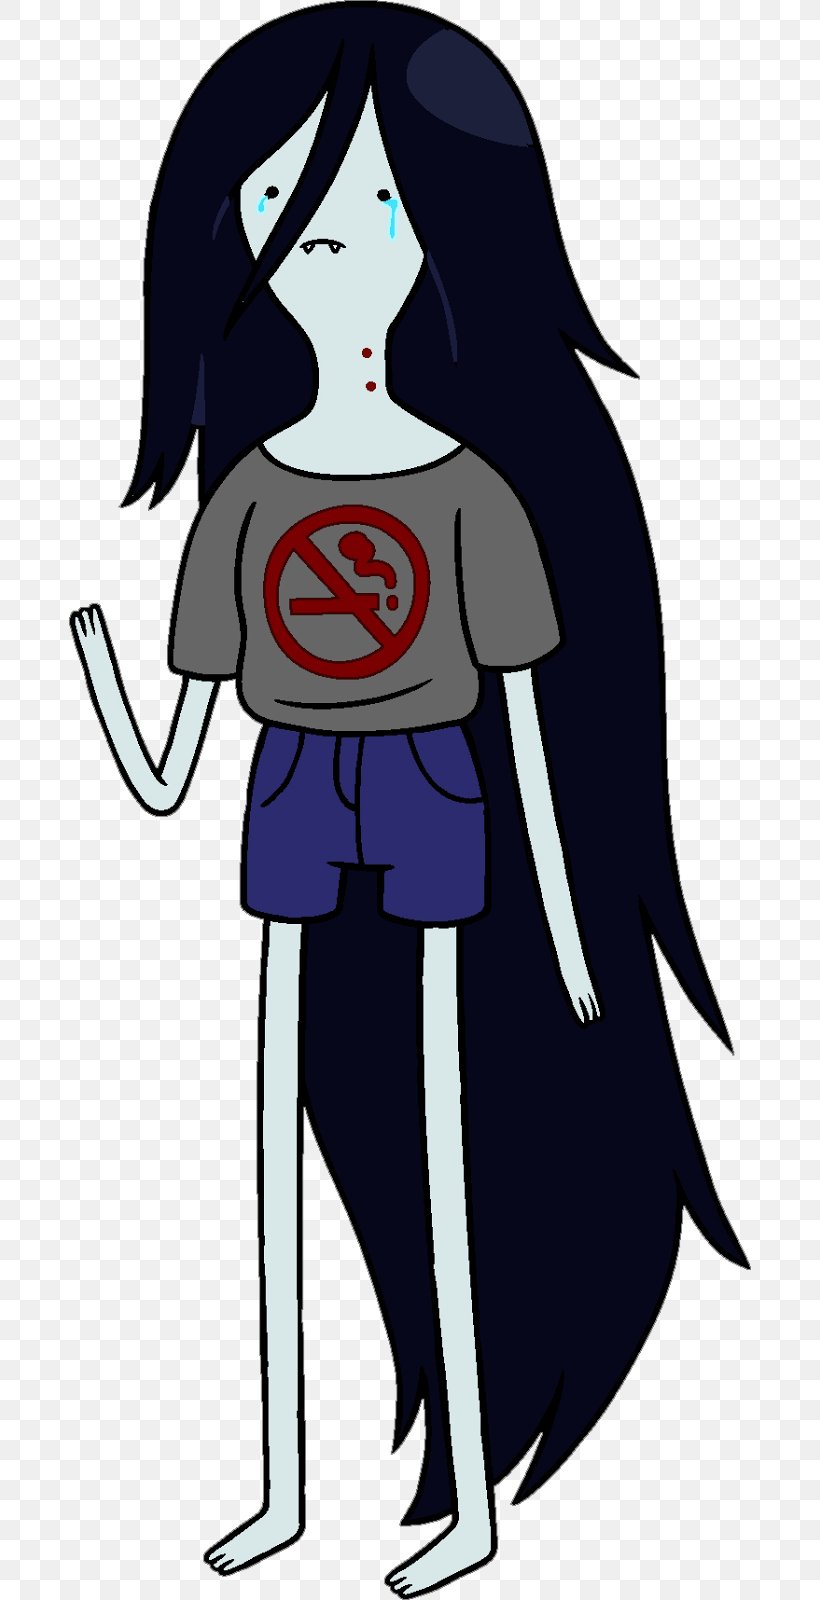 Marceline The Vampire Queen Ice King Finn The Human Princess Bubblegum Flame Princess, PNG, 682x1600px, Marceline The Vampire Queen, Adventure, Adventure Time, Art, Character Download Free